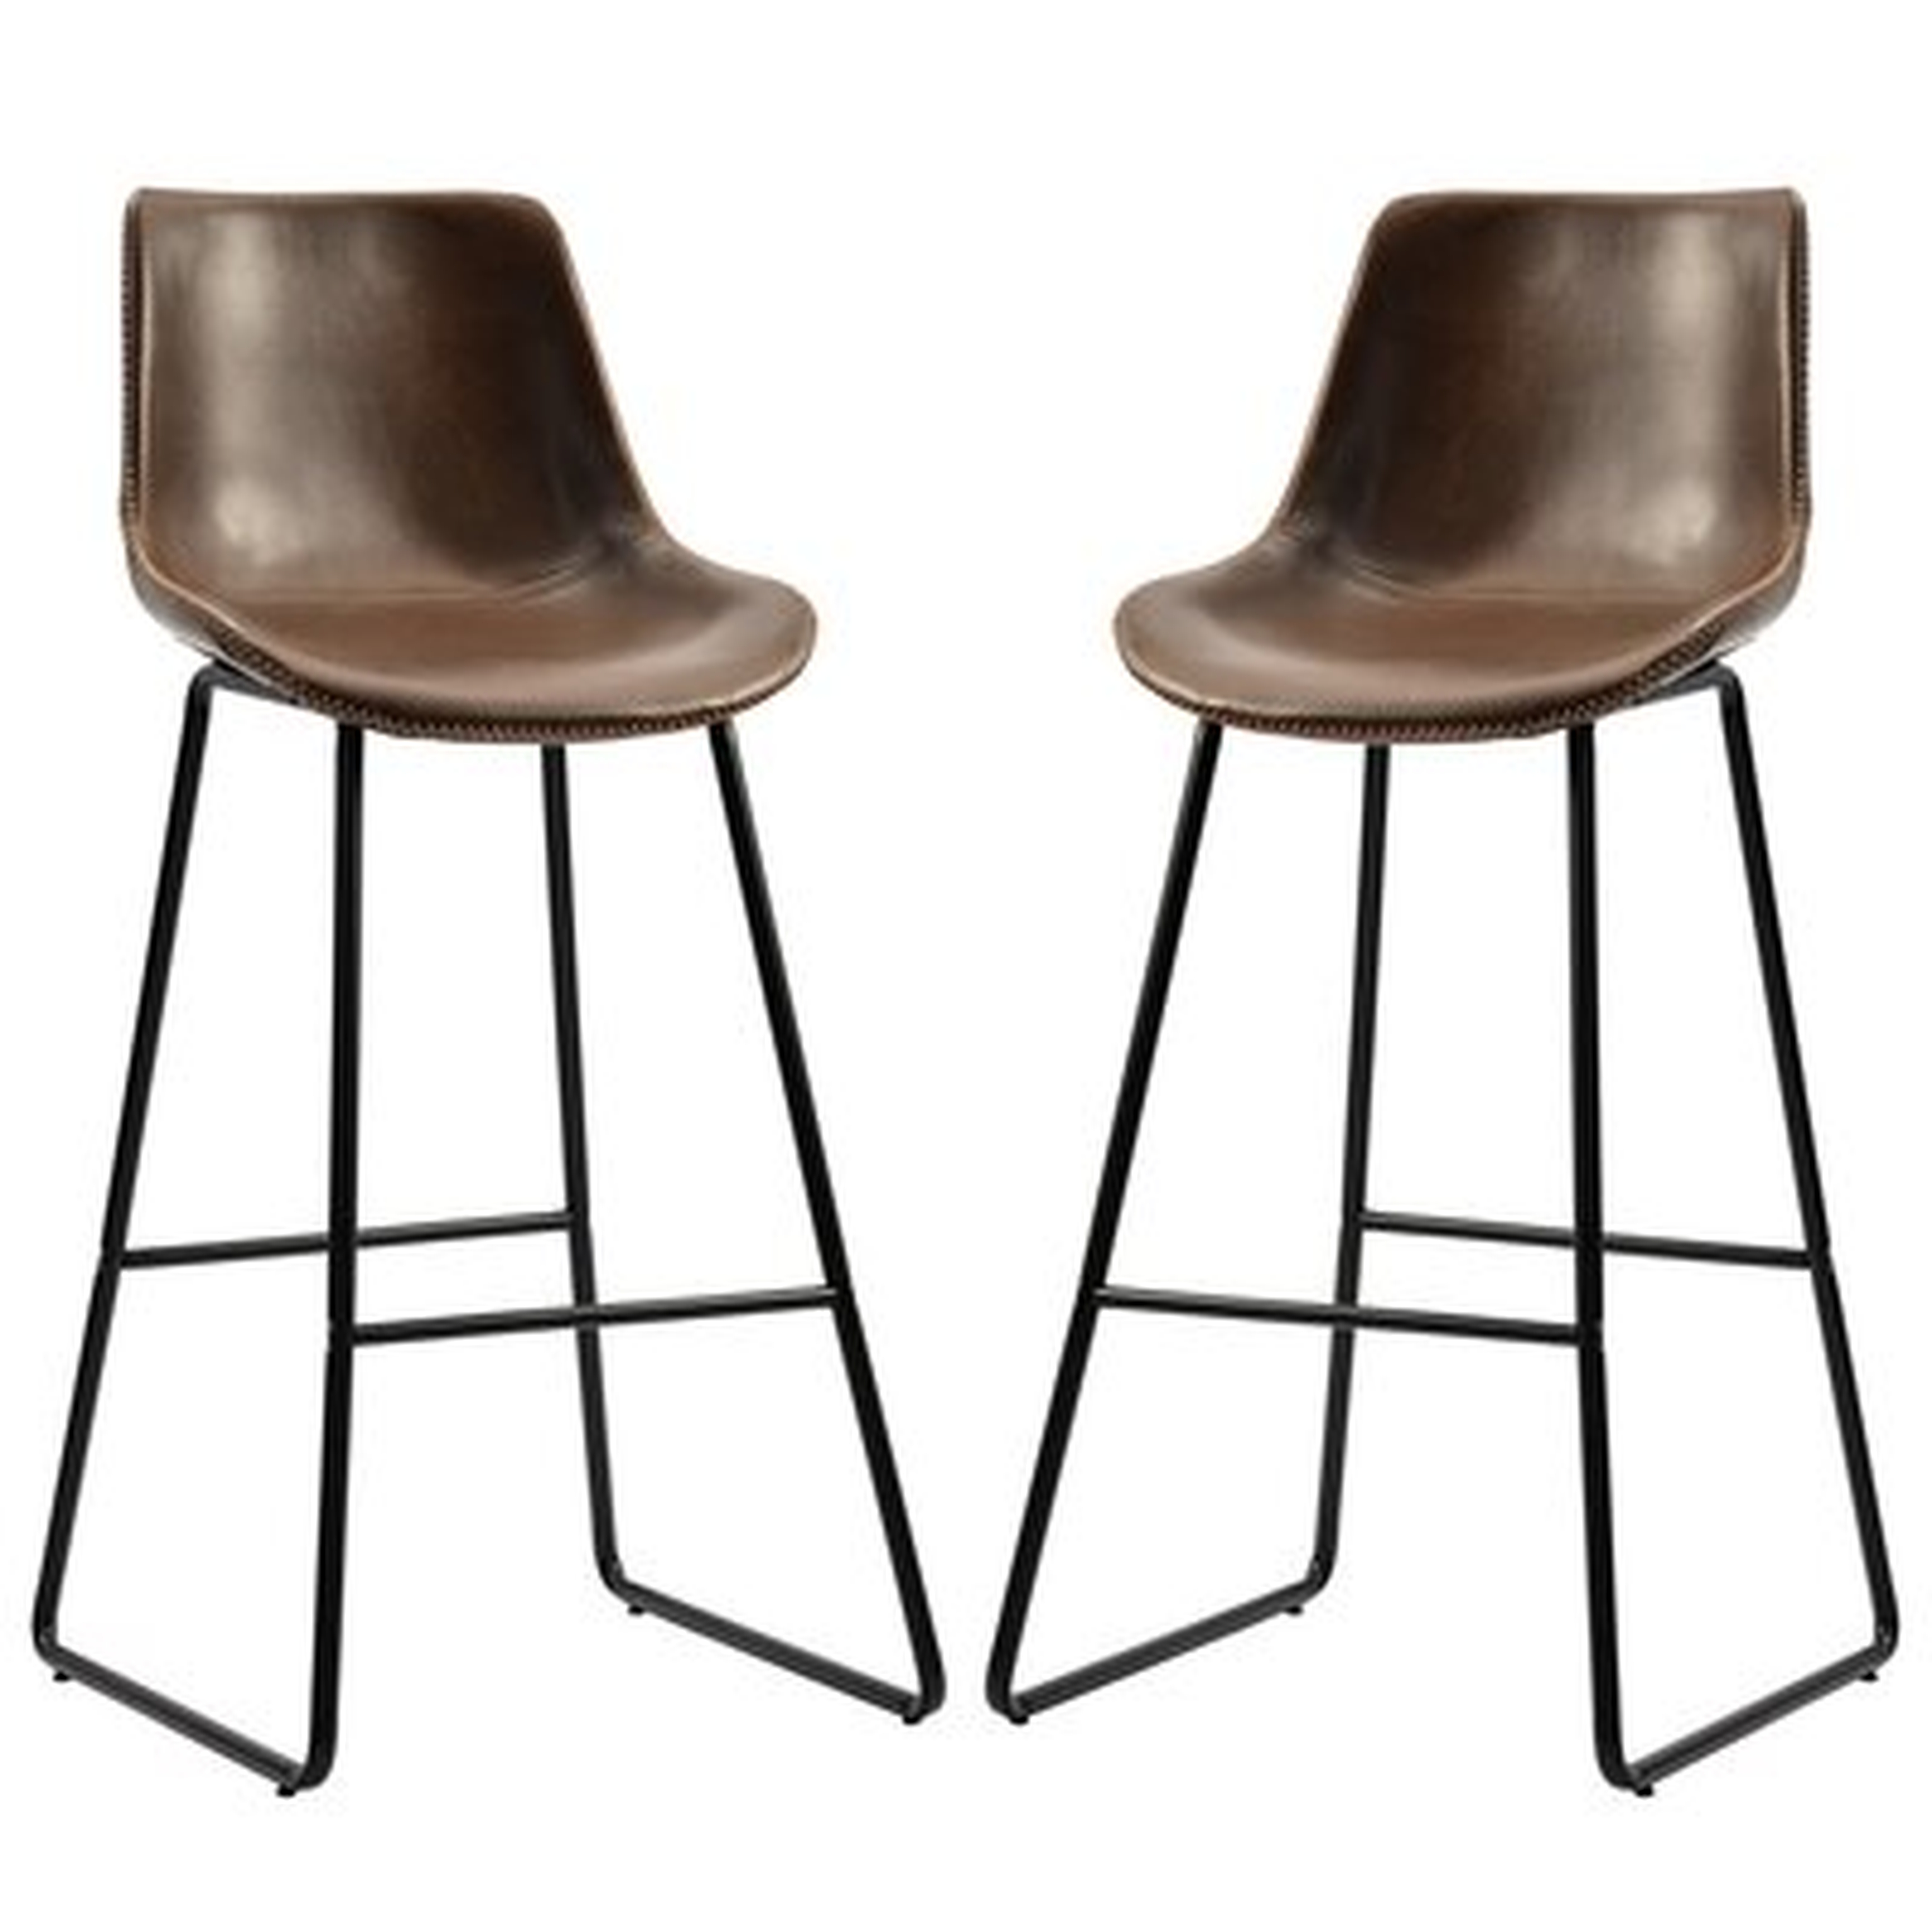 Vintage Bar Stools Set Of 2, Leatherier Counter Height Dining Stools With Back For Kitchen, Dining Room And Living Room, Upholstered Pub Counter Height Chairs, Dining Room Furniture - Wayfair